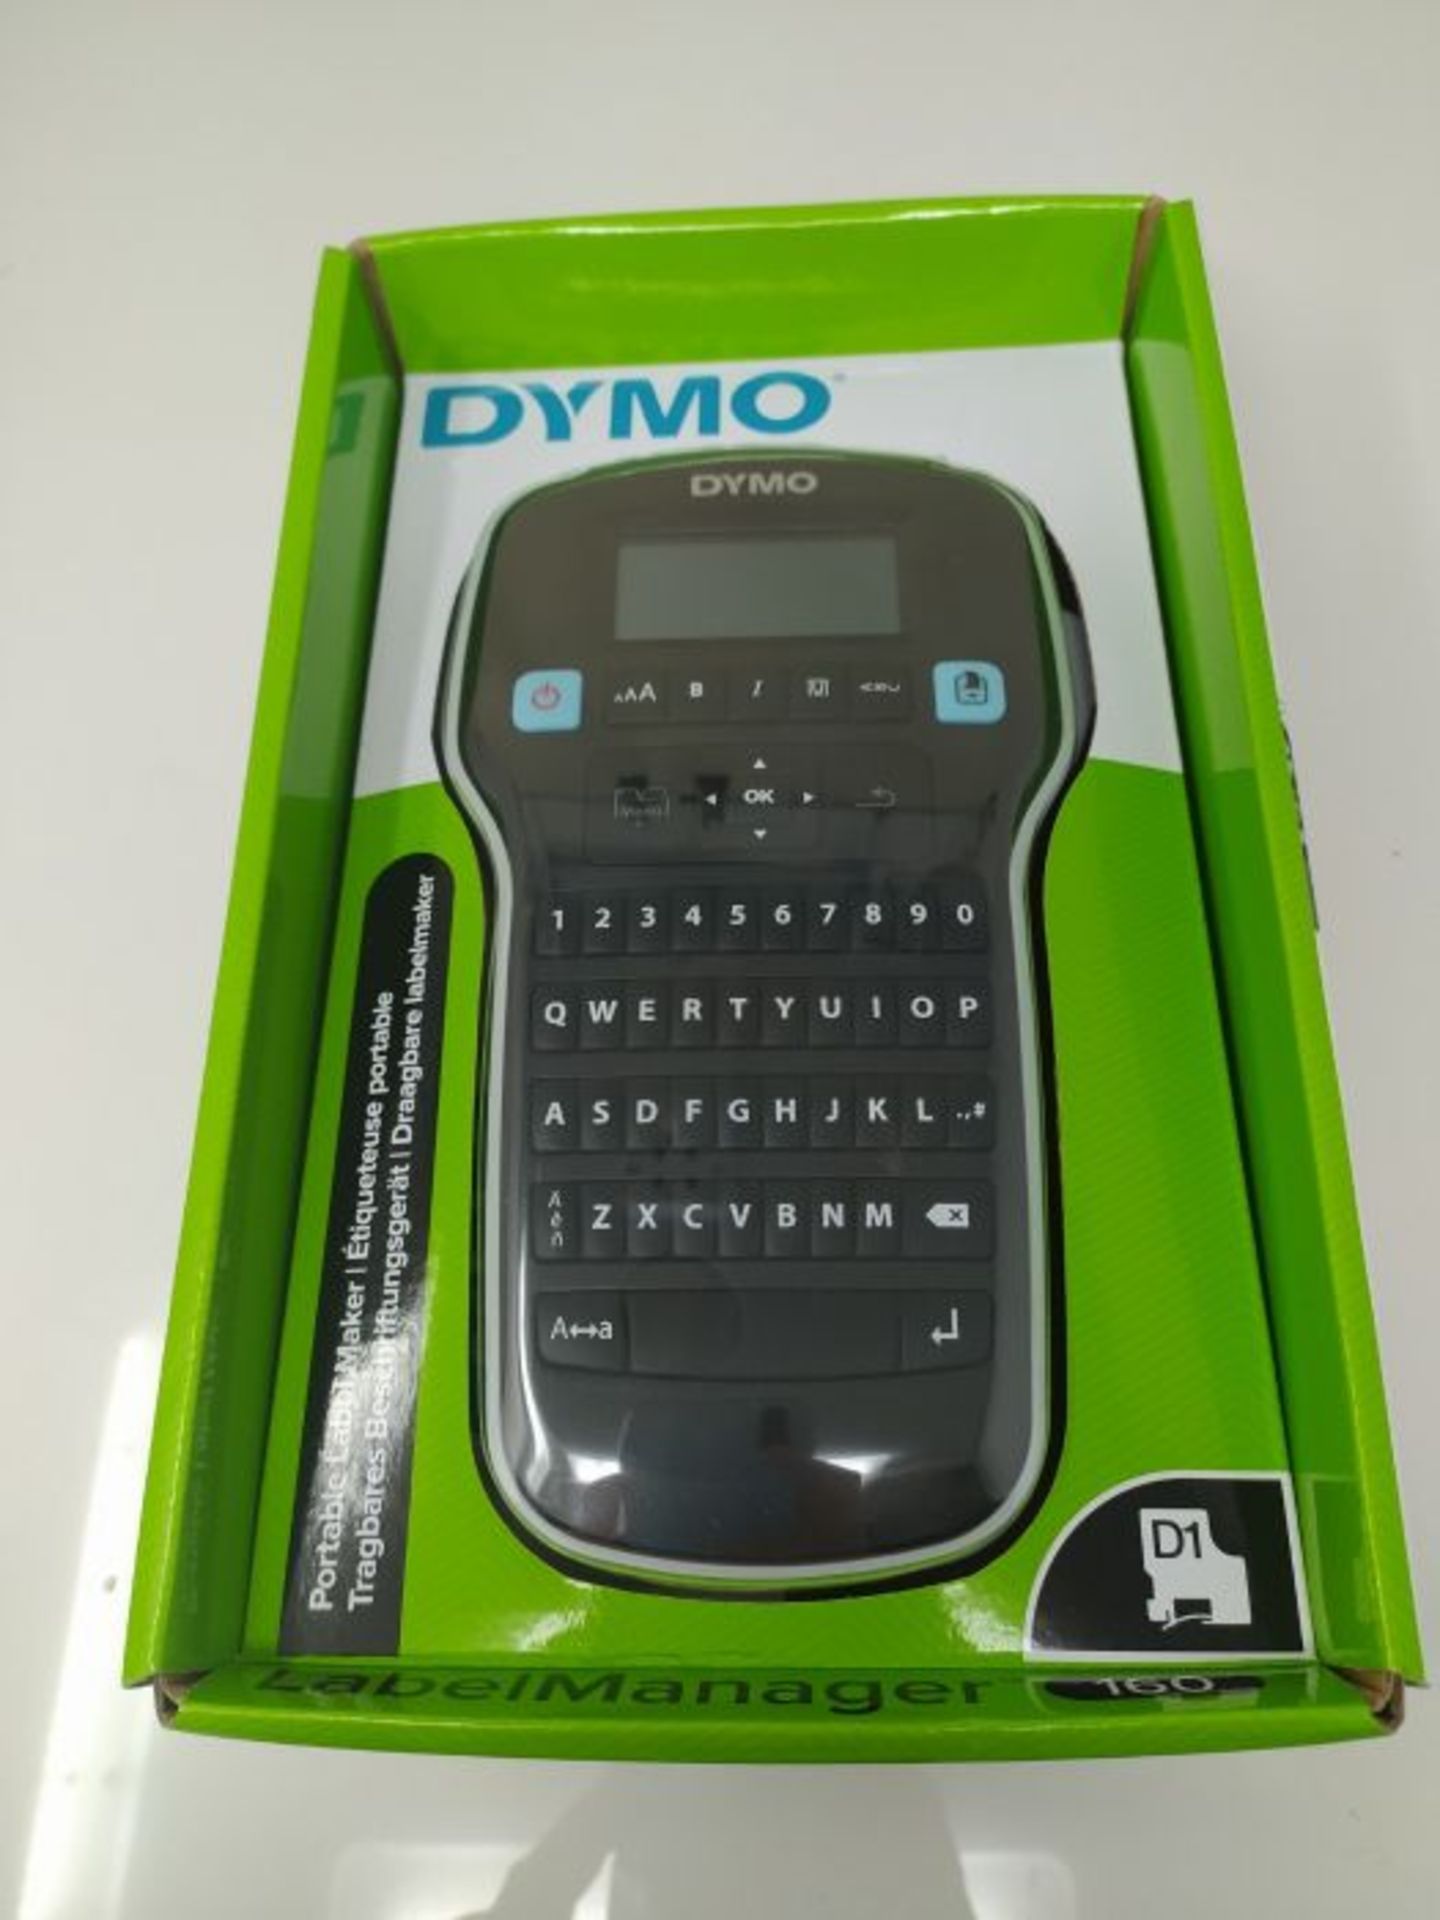 Dymo LabelManager 160 Handheld Label Maker with QWERTY Keyboard - Image 2 of 2